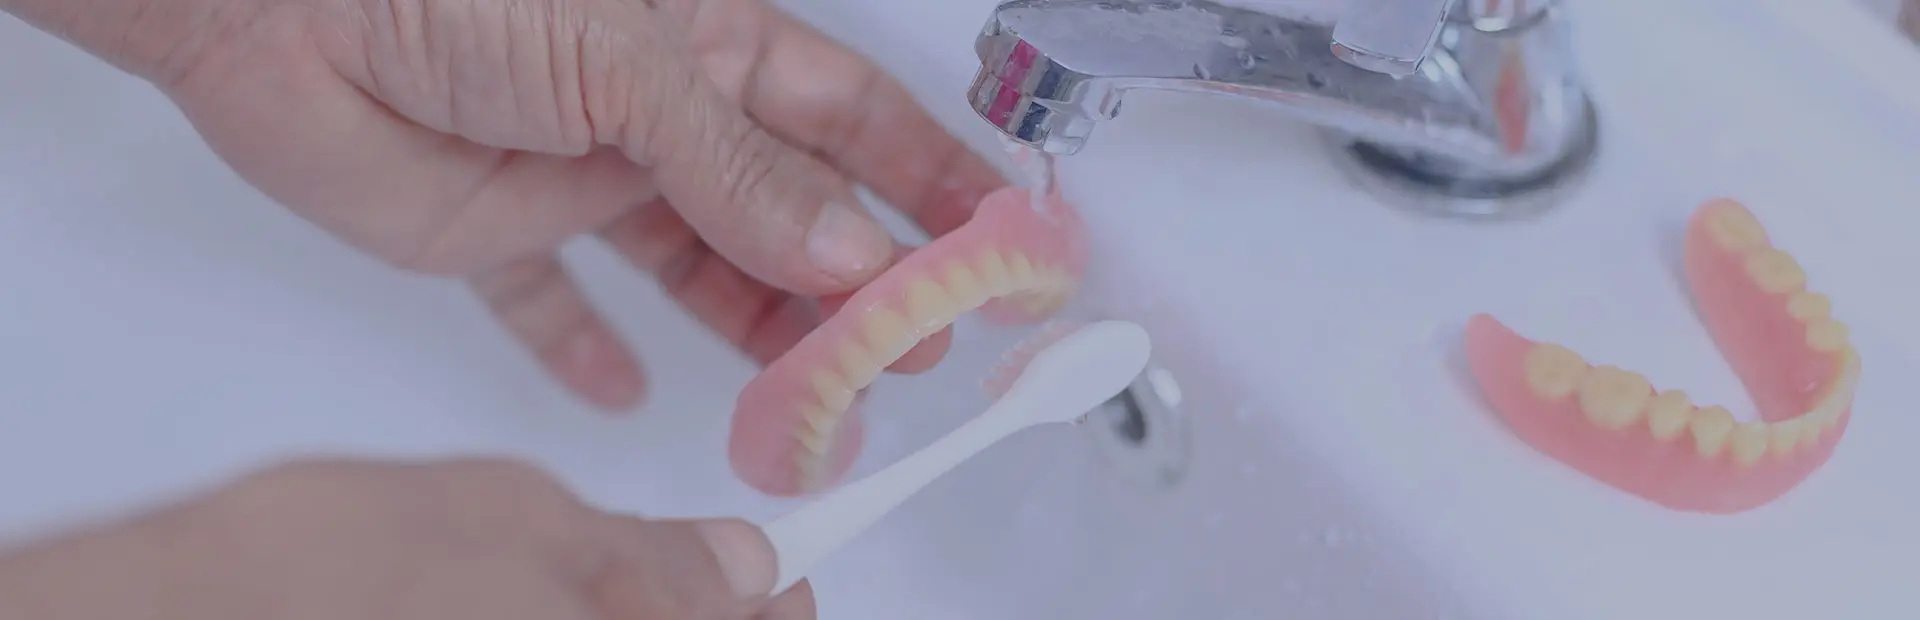 A close up of a soft toothbrush and dentures, as it's important to remove dentures to brush them for correct denture care and cleaning and remove them for repair, even when using Fixodent. 